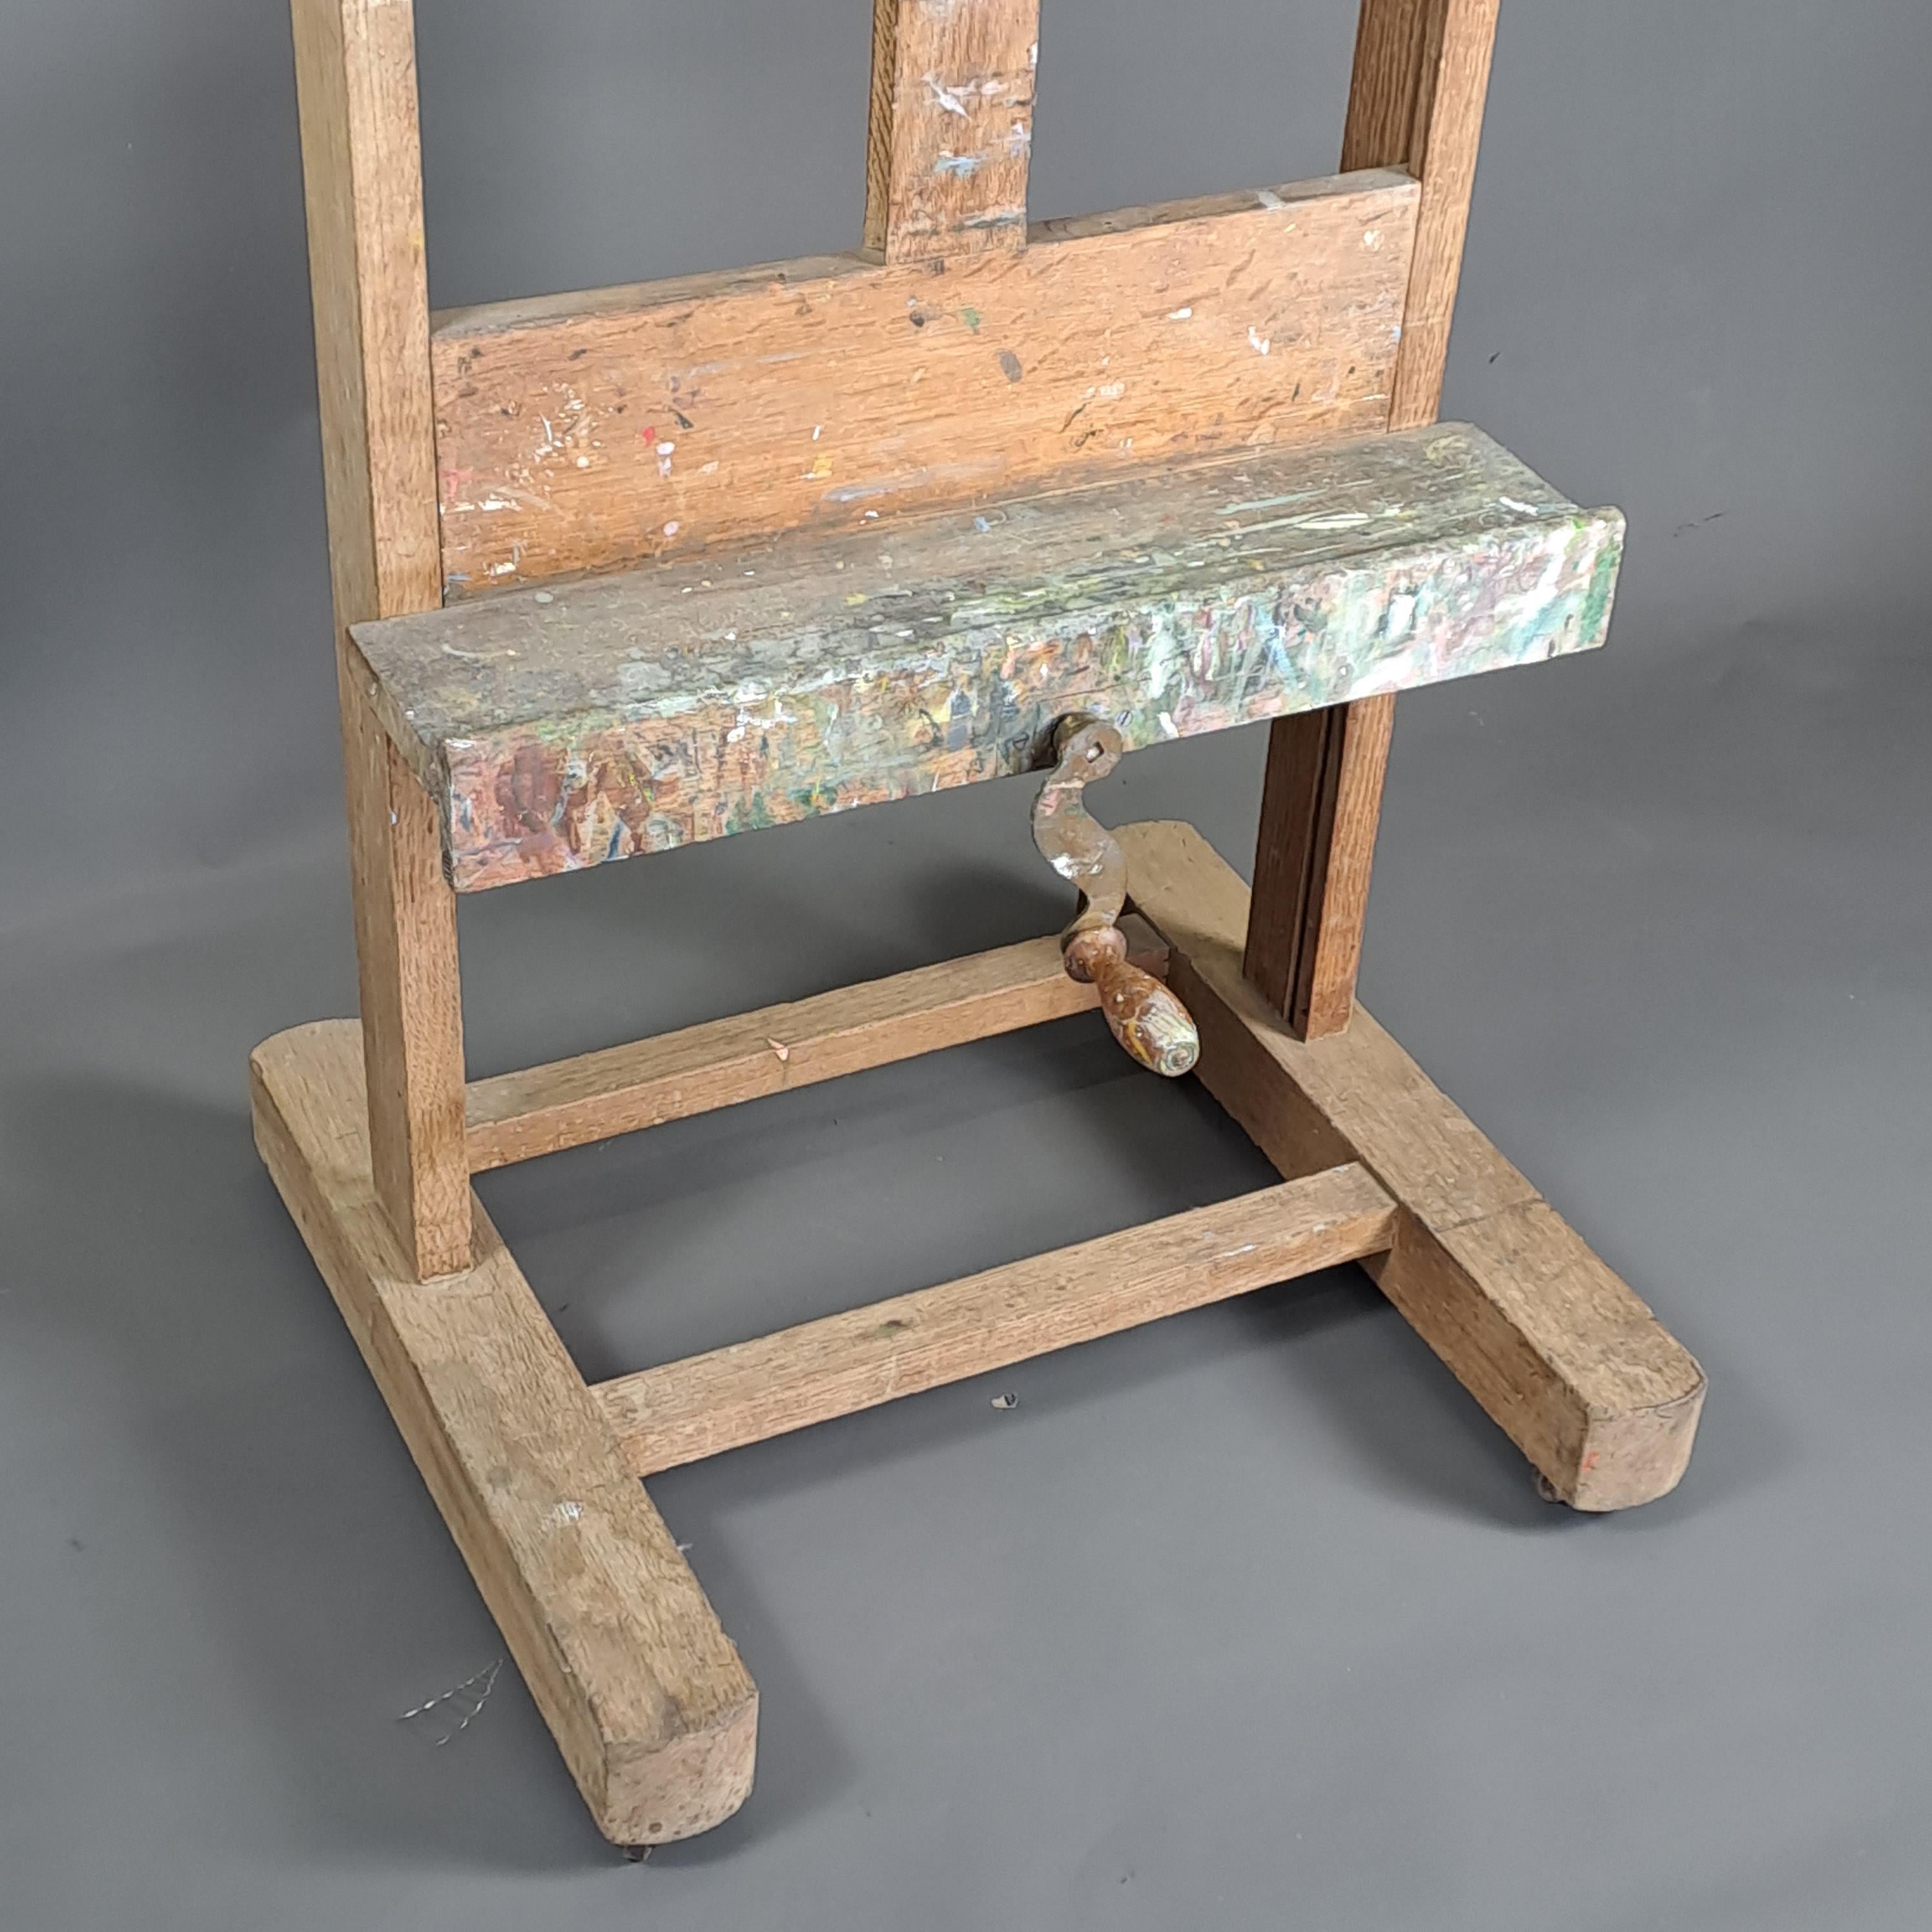 Large painting with rack in solid oak.
Removable bronze crank, rack system with cast iron casing signed Jourdain.
Mounted on four iron casters
Late 19th early 20th century.
Very good general condition, no gaps or weaknesses, just traces of use